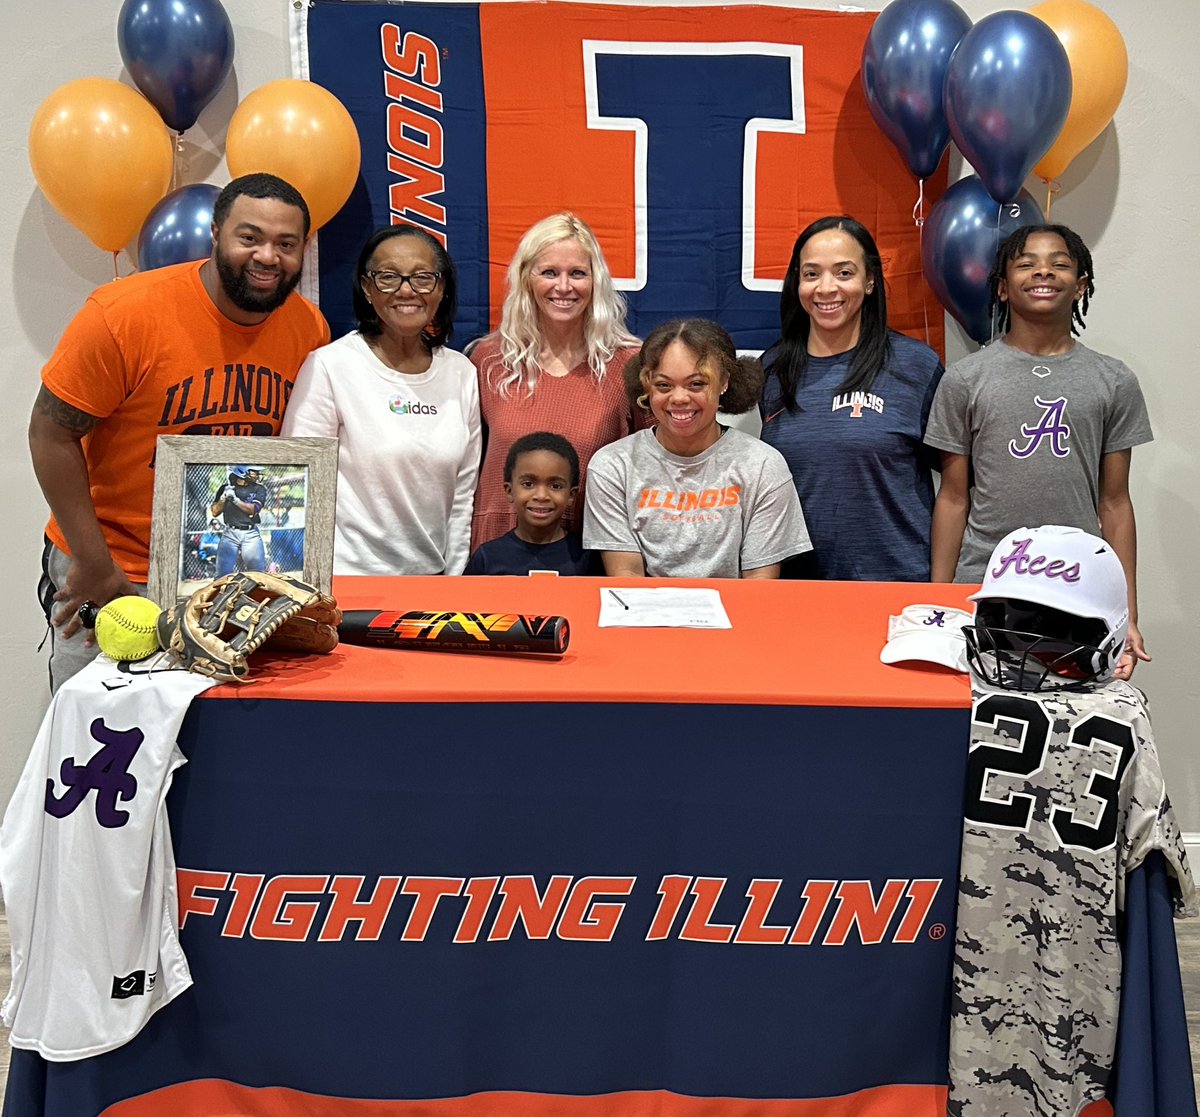 💜♾️🧡 😇🖊️ 𝓢𝓲𝓰𝓷𝓮𝓭 @IlliniSB #FamiLLy thank U to my Coach, my mentor my friend! Grimace aka @STayTaylor18 thank U @rktaylor12 as well for everything you guys have done for me in my journey. Can’t wait to be a ILLINI! @TyraPerry13 @Ltrout07 @Coach_Veee @sickelssydney21